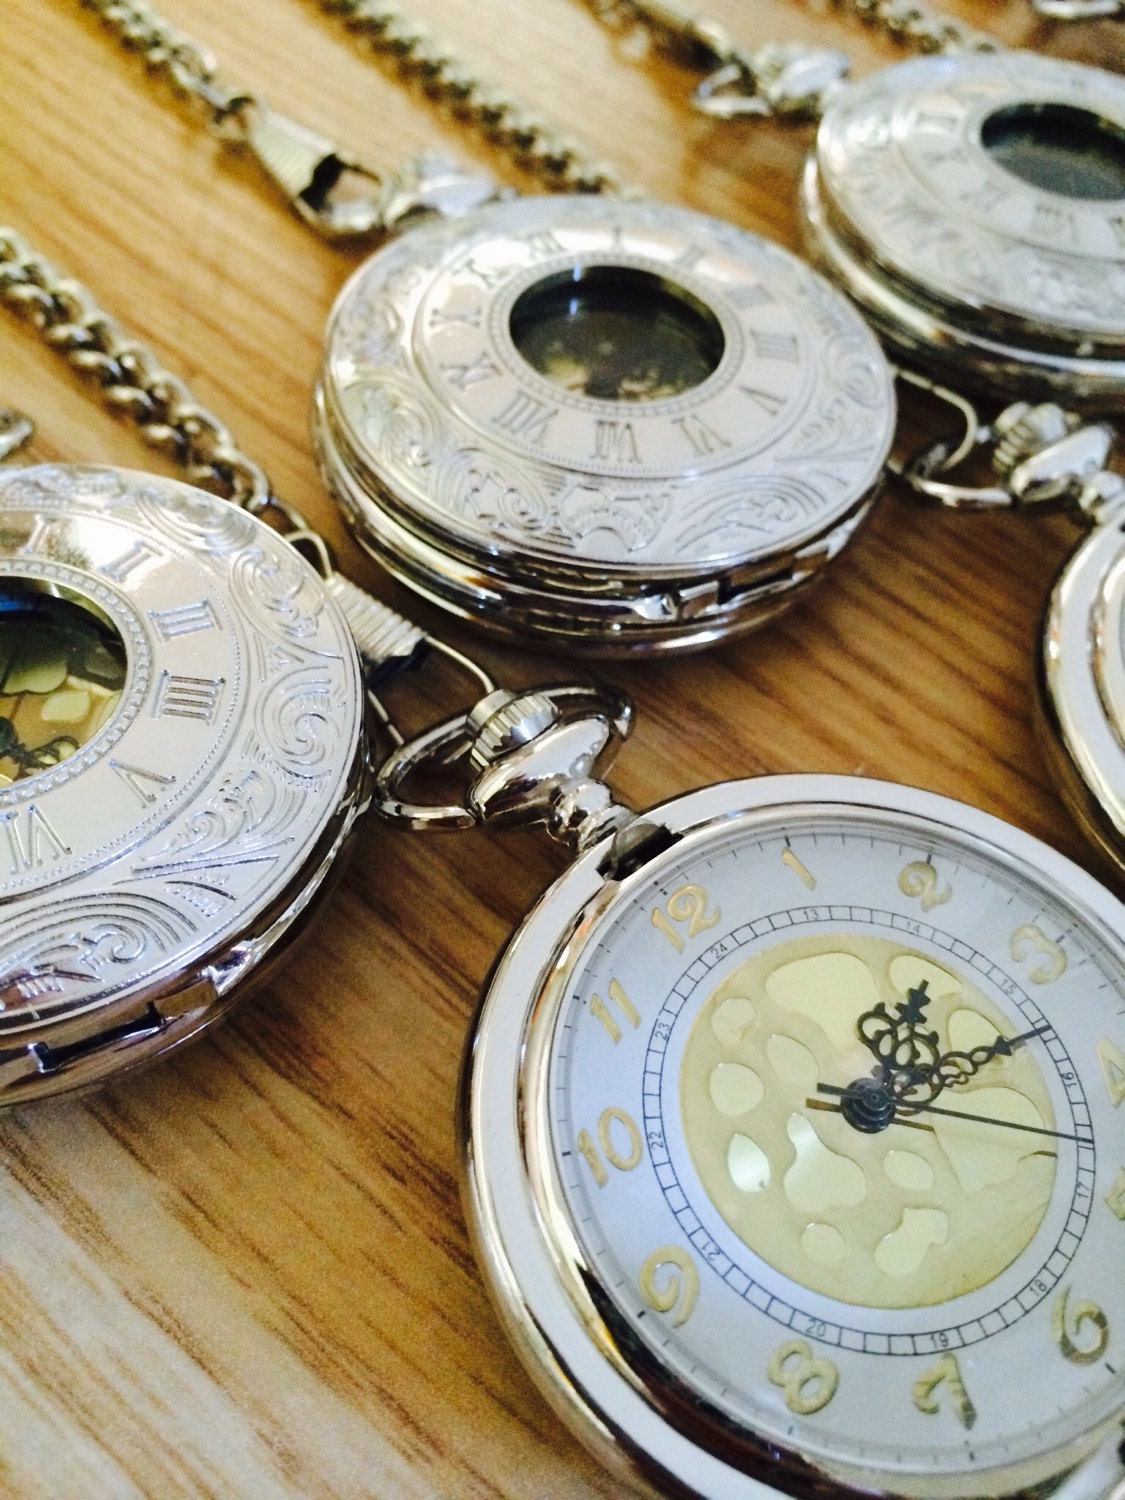 Wedding Set of 4 Silver Pocket Watches with Chain Groomsmen Gift Ships from Canada